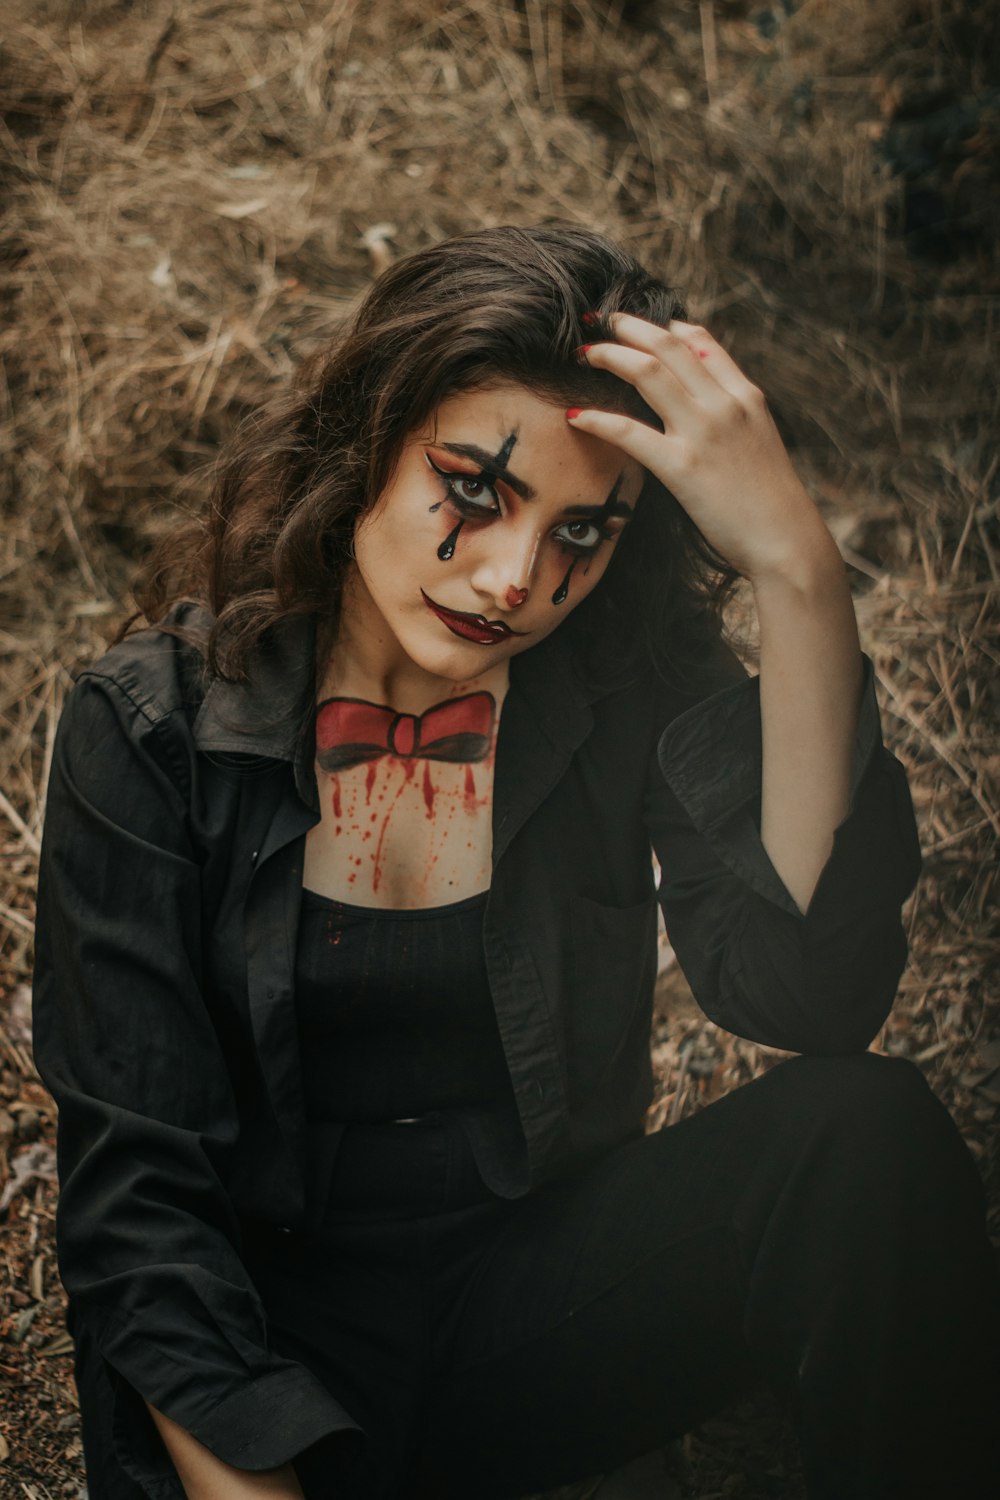 woman wearing black collared button-up long-sleeved shirt with Joker paint on face sitting while touching her head